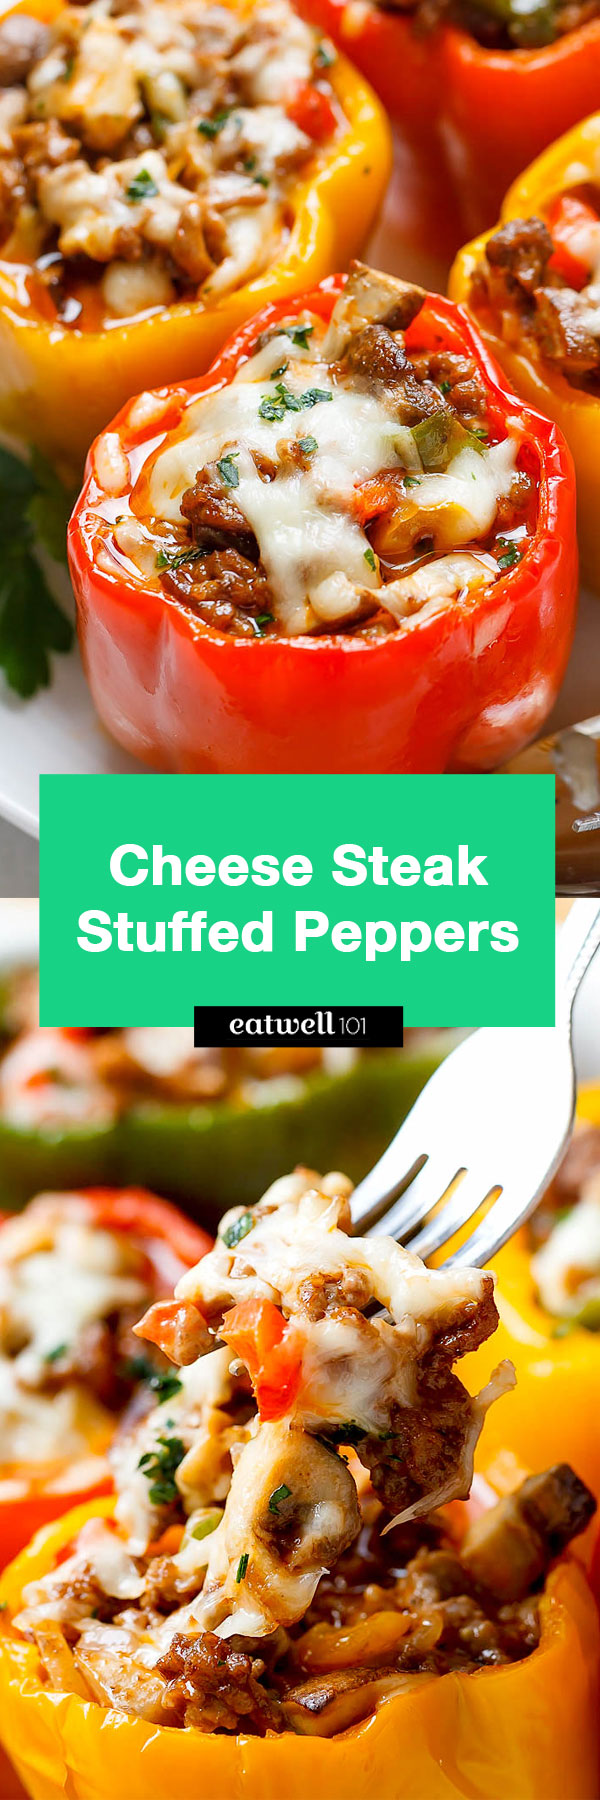 Cheese Steak Keto Low-Carb Stuffed Peppers - #eatwell101 #recipe #keto #lowcarb - An easy, cheesy, filling meal that is packed with flavor and delicious ingredients!